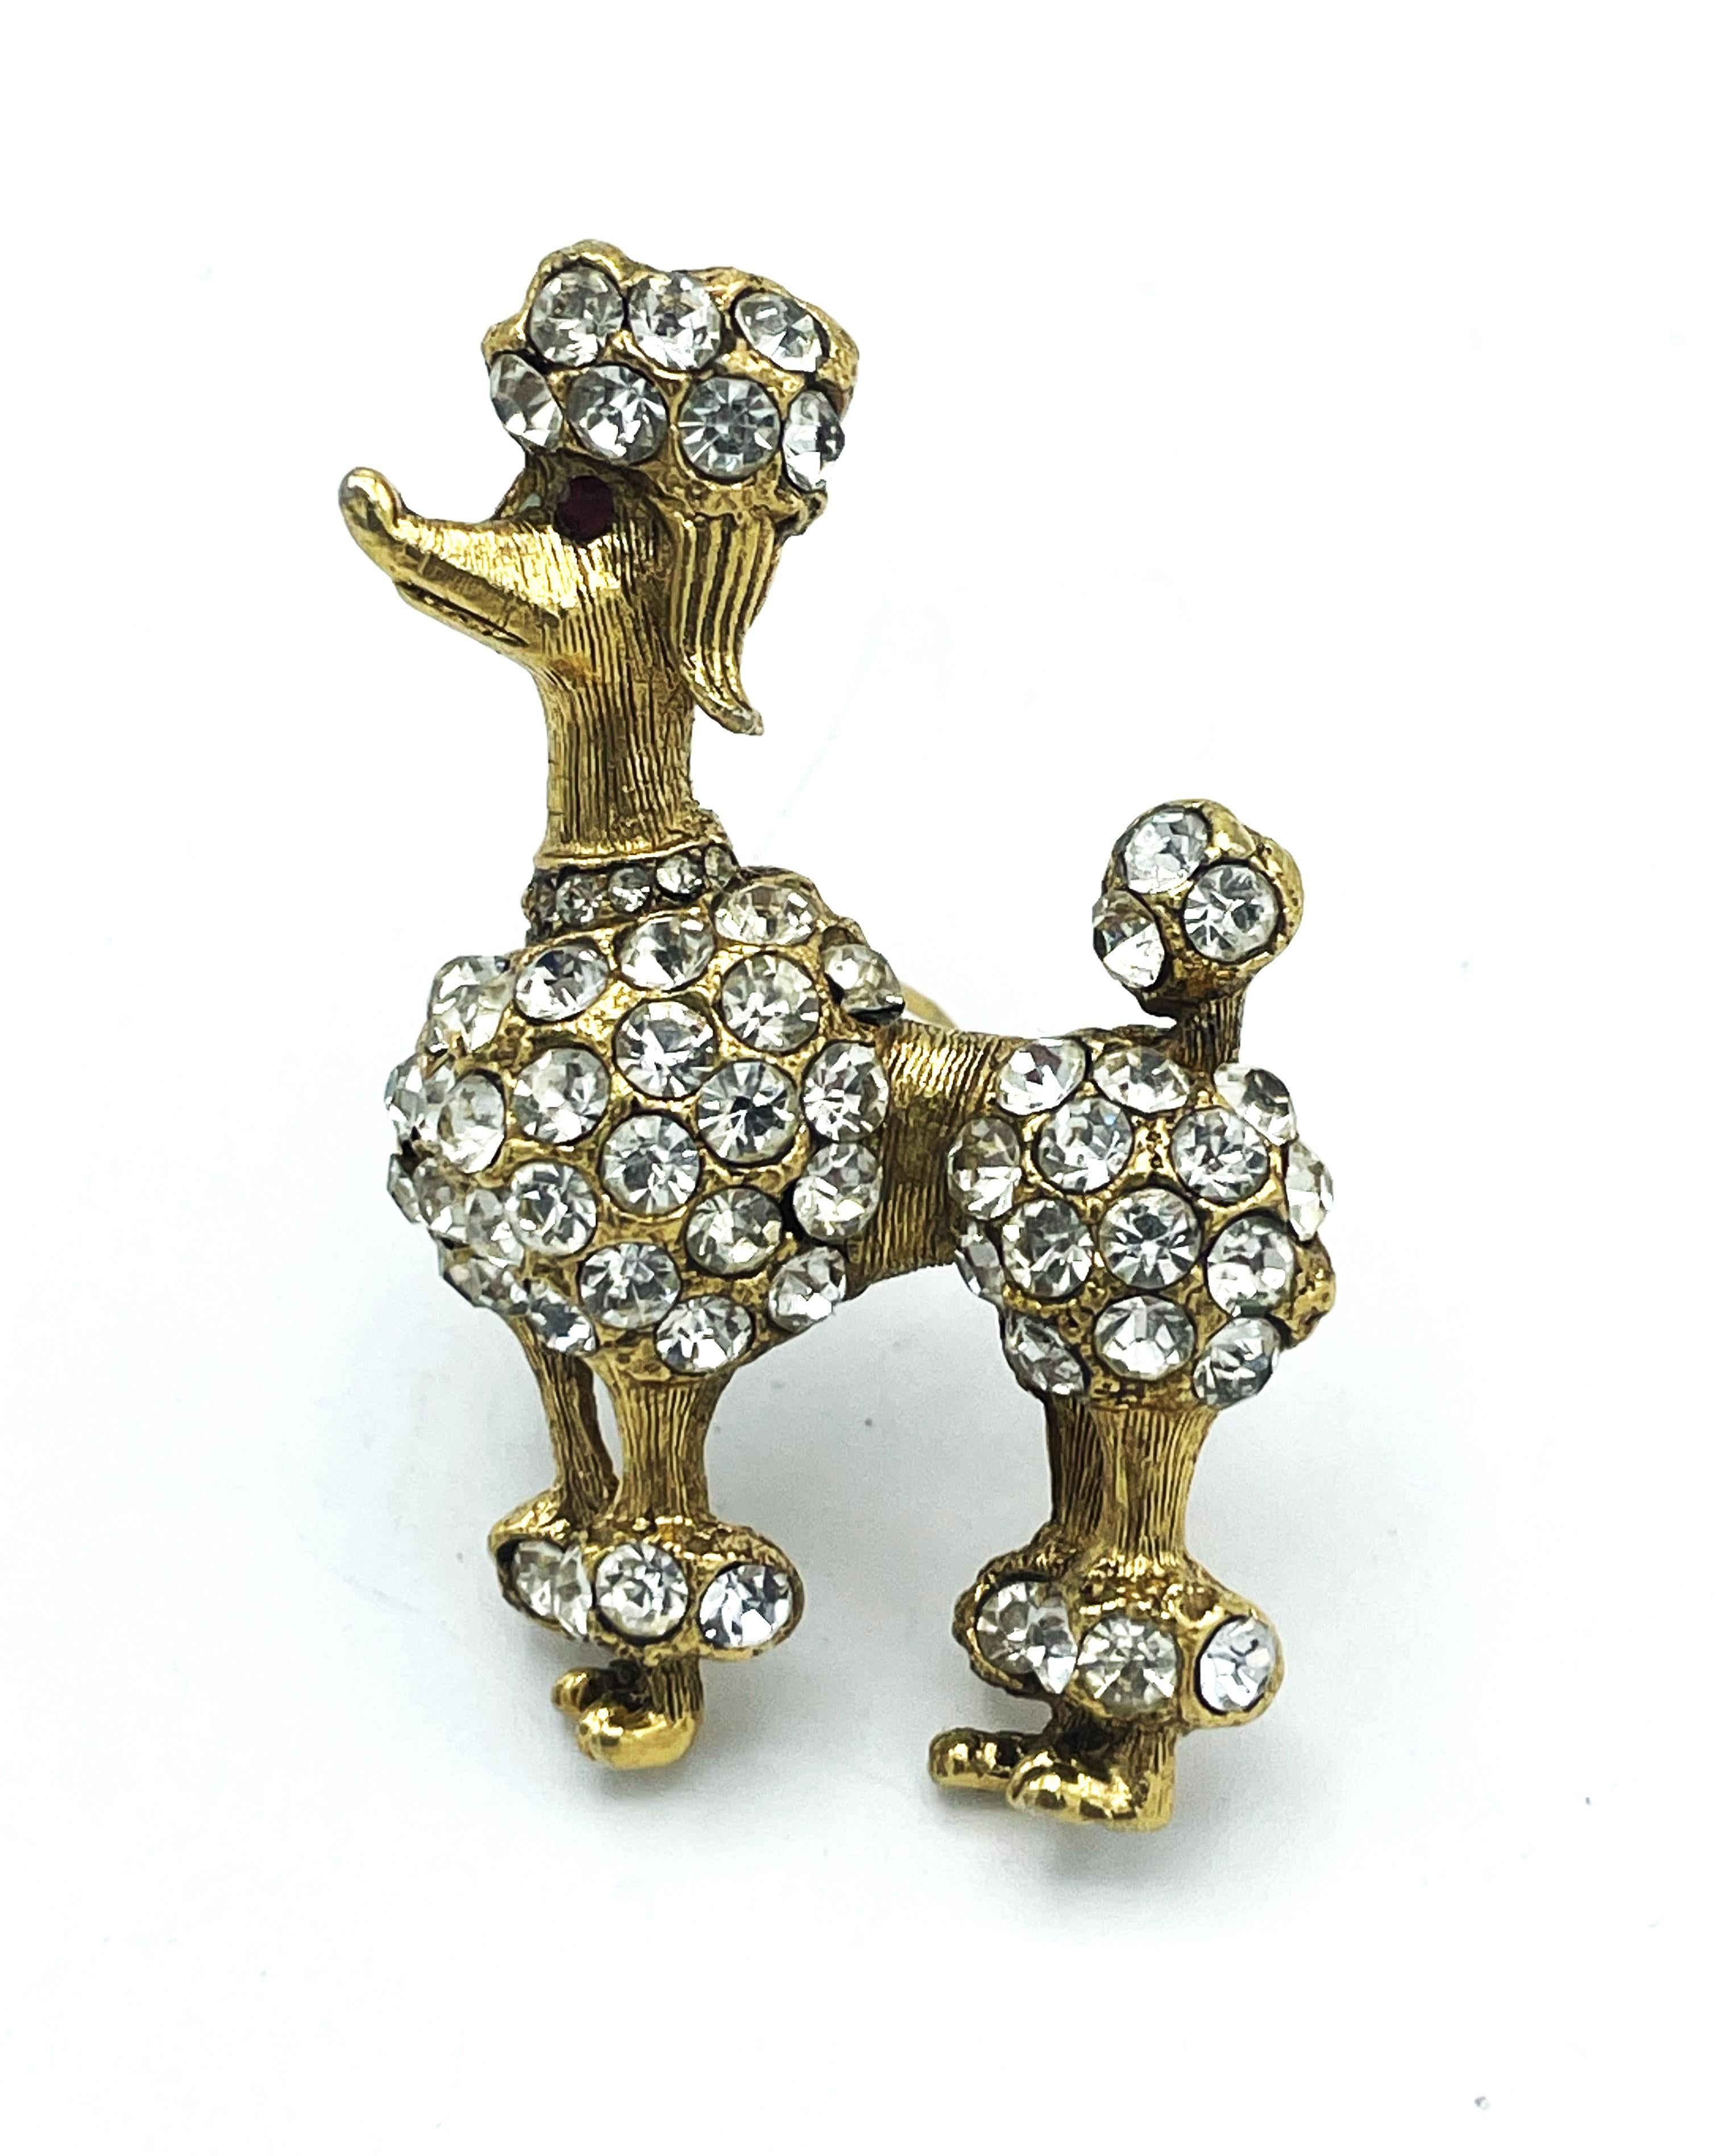 Brooch in the shape of a proud poodle, set with rhinestones, signed BSK copyright.
Made in the US 1950's
Dimensions
Hight 4.5 cm x W 3cm, Deep 1 cm 
Very good condition 